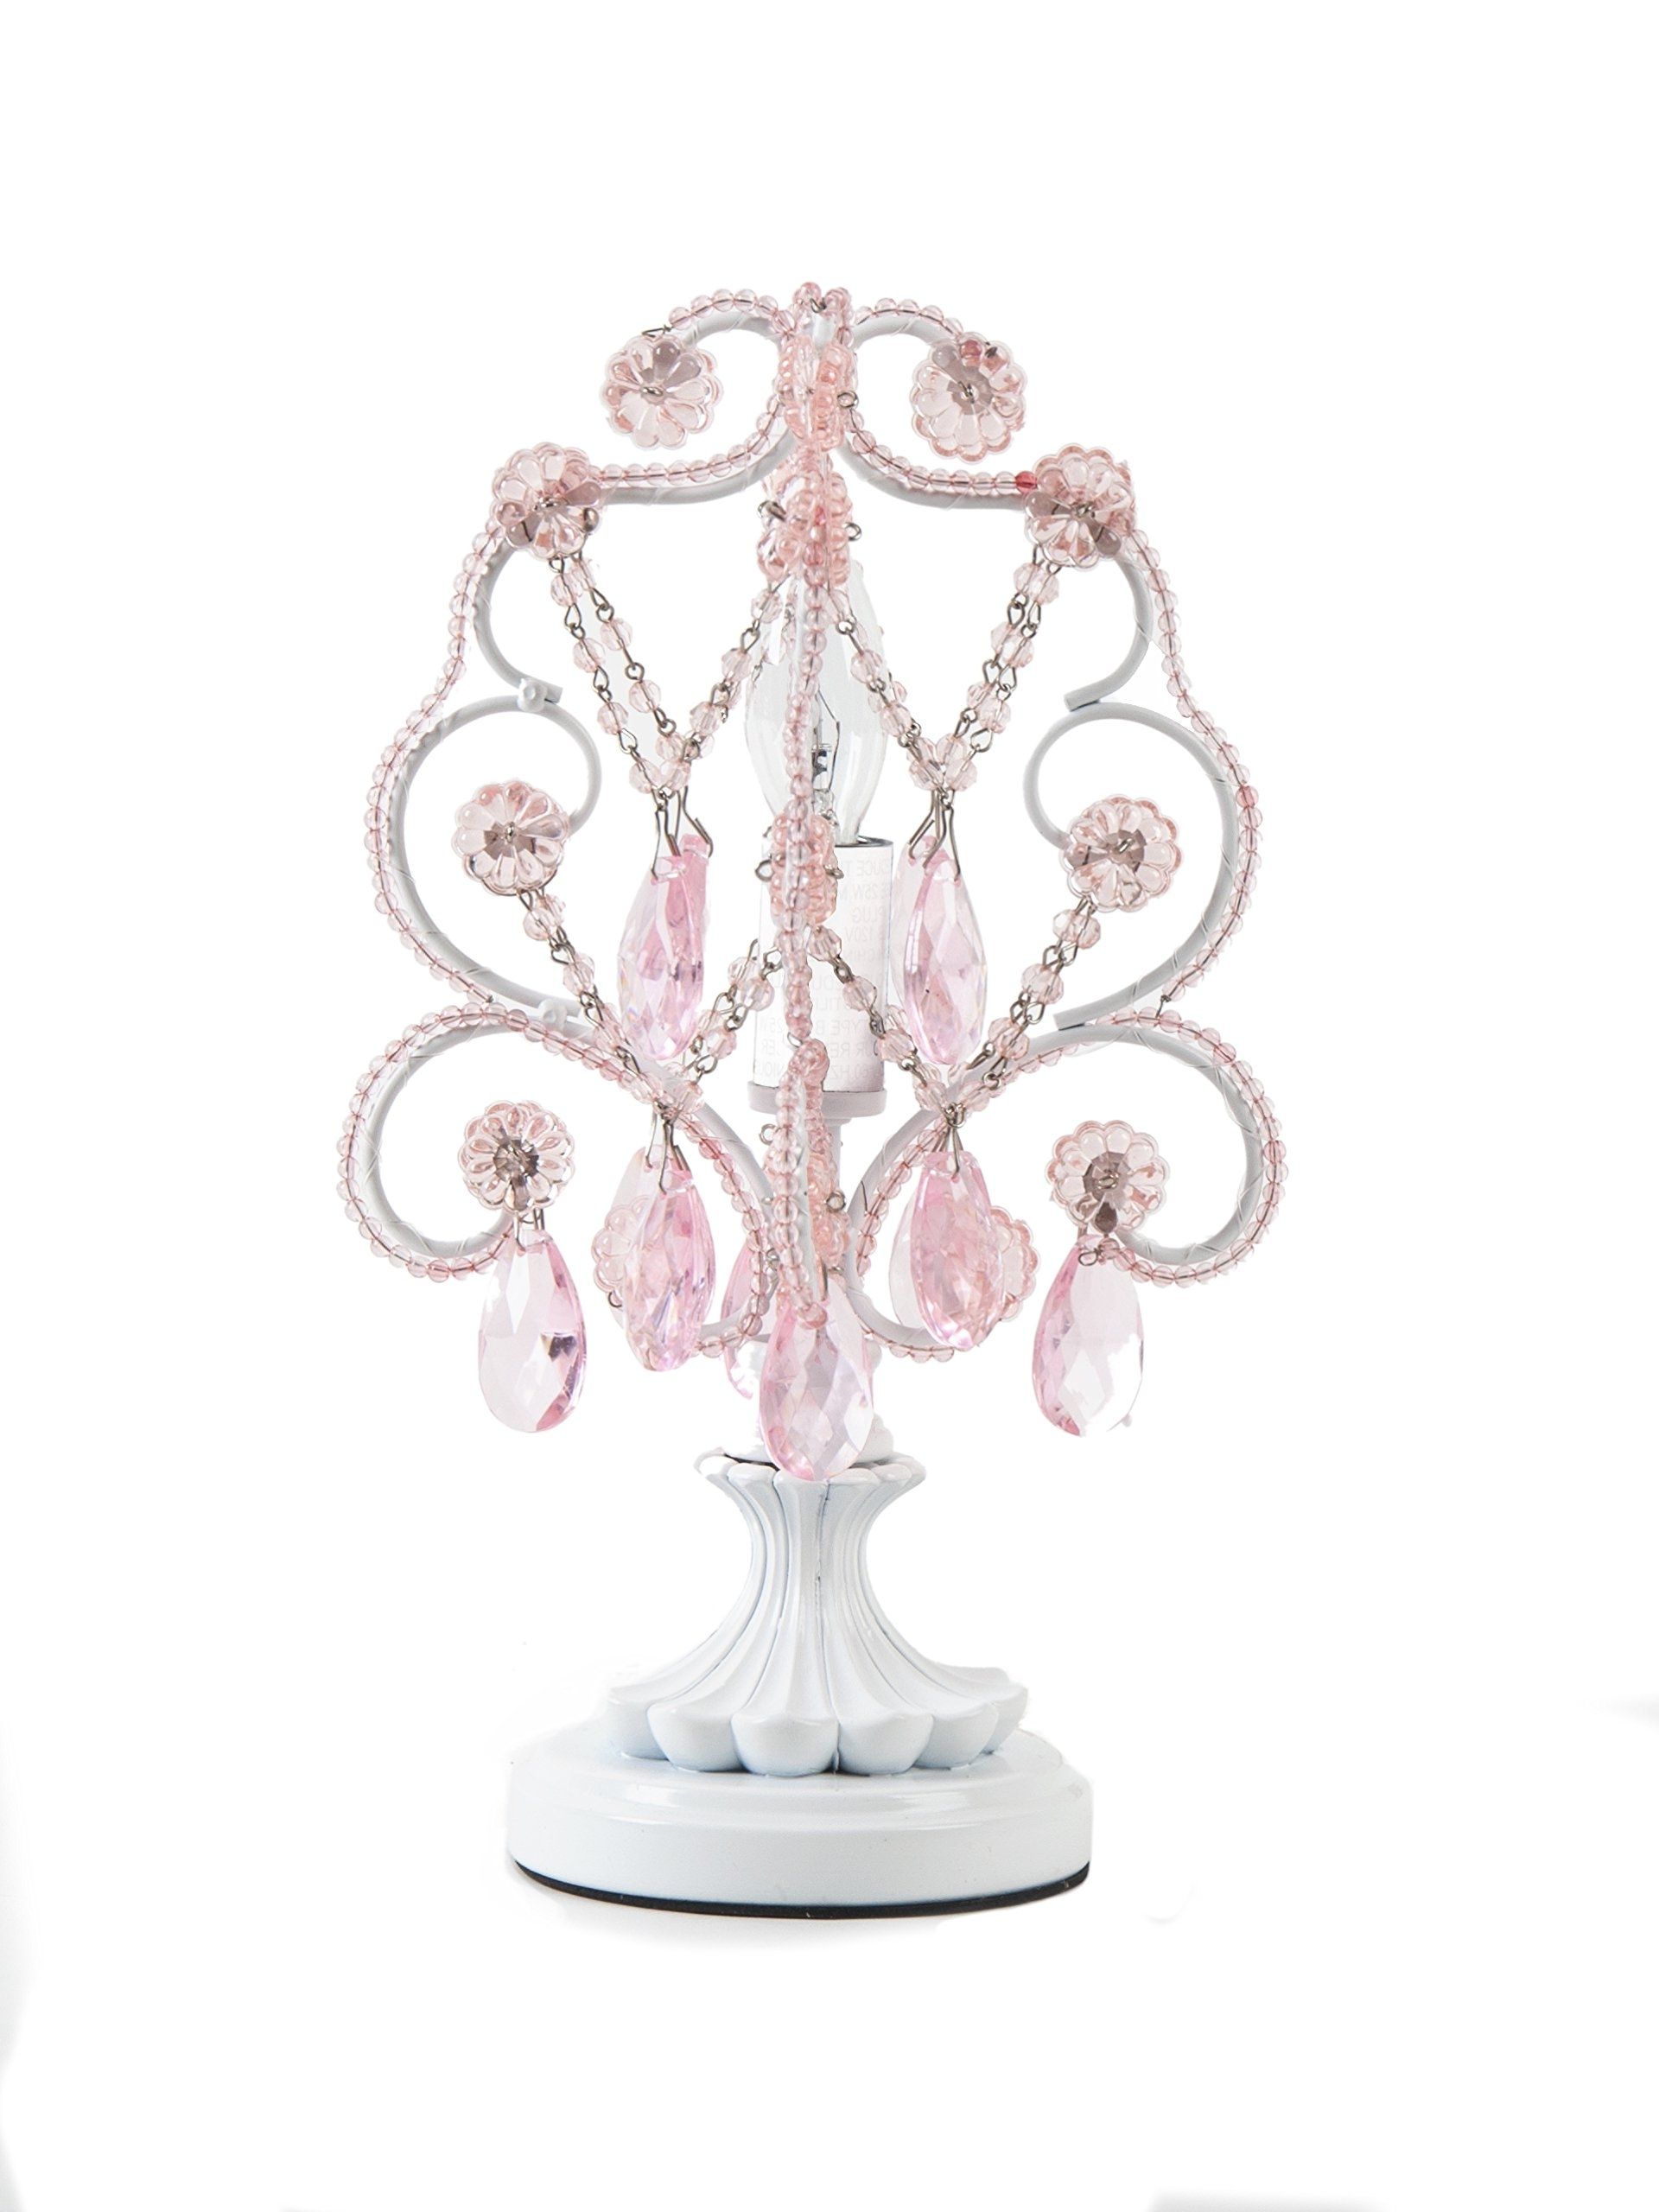 Mini Chandelier Table Lamps With Latest Amazon : Tadpoles Mini Chandelier Table Lamp, White : Crystal (View 5 of 15)